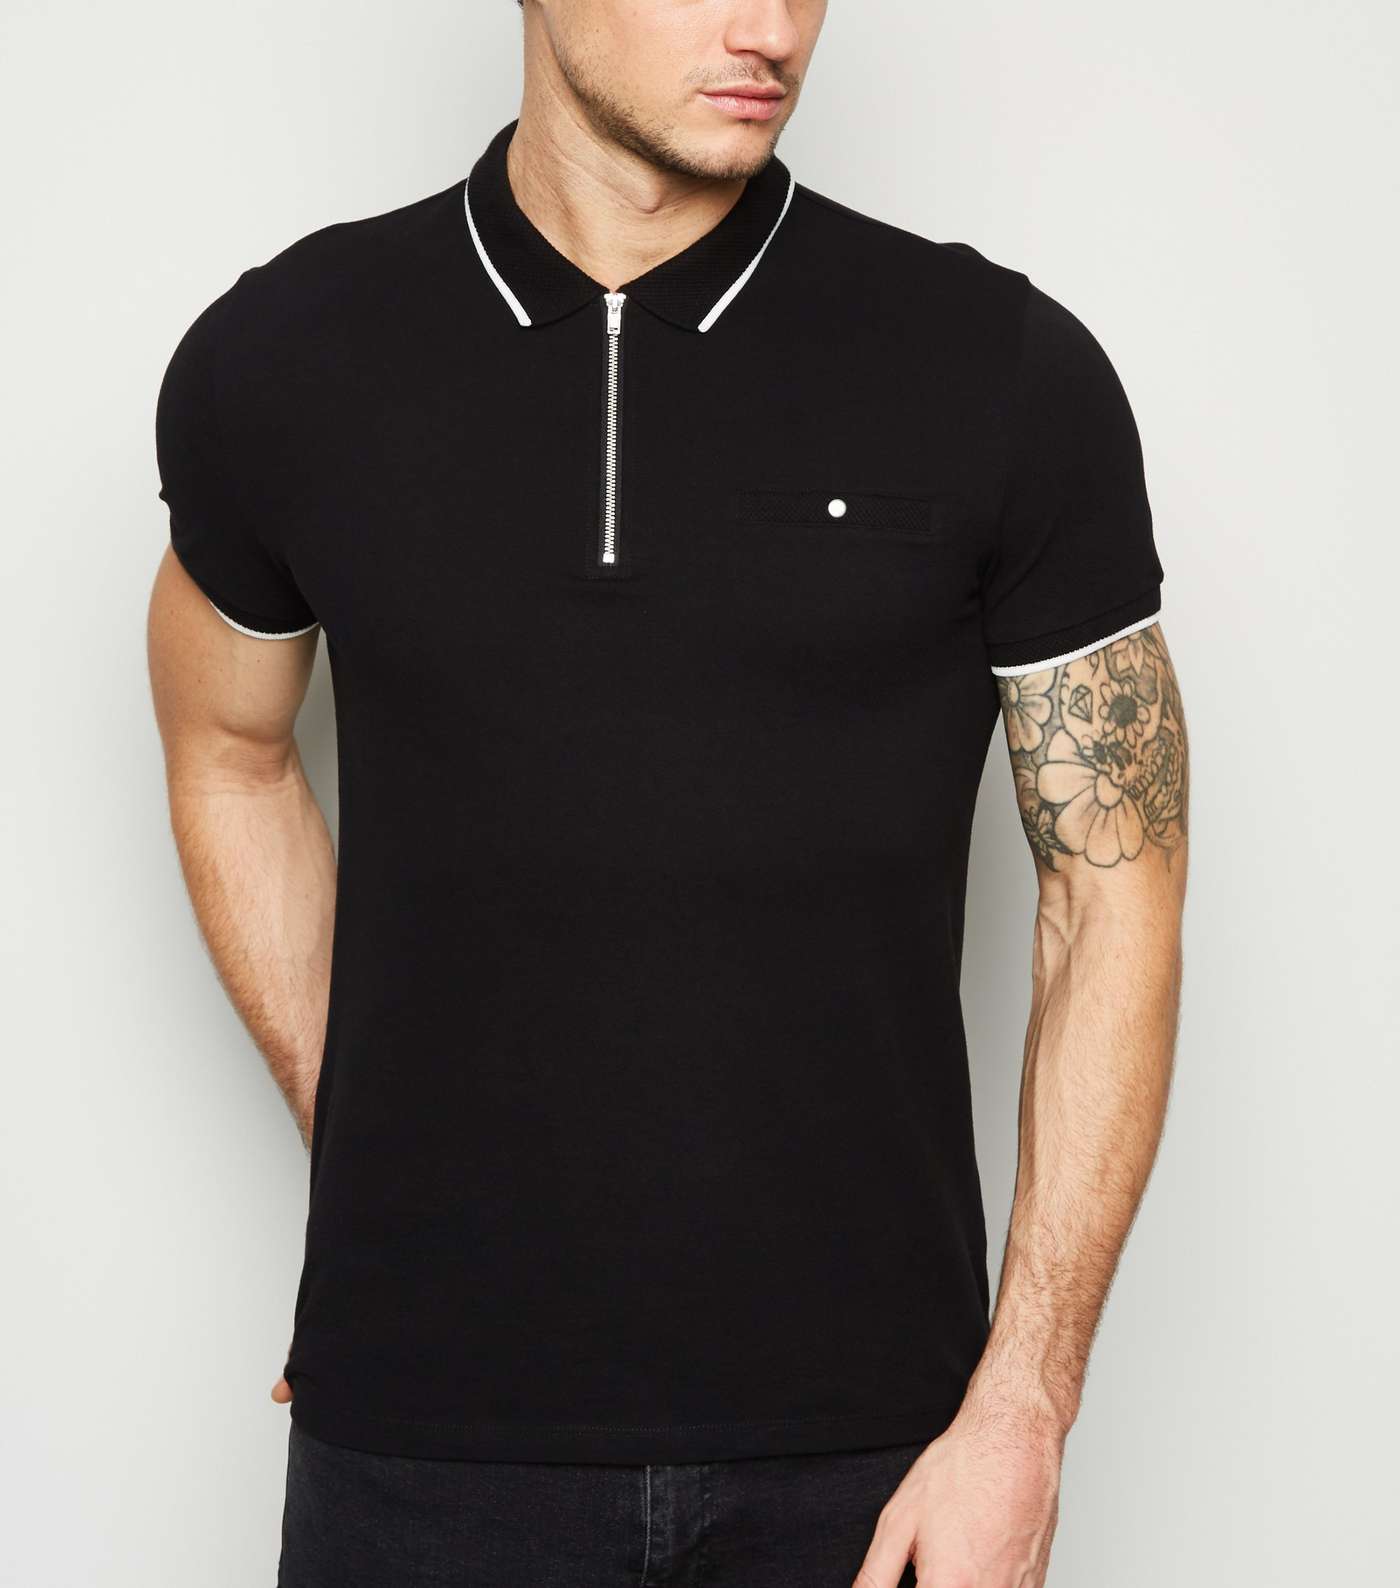 Black Tipped Zip Front Polo Shirt